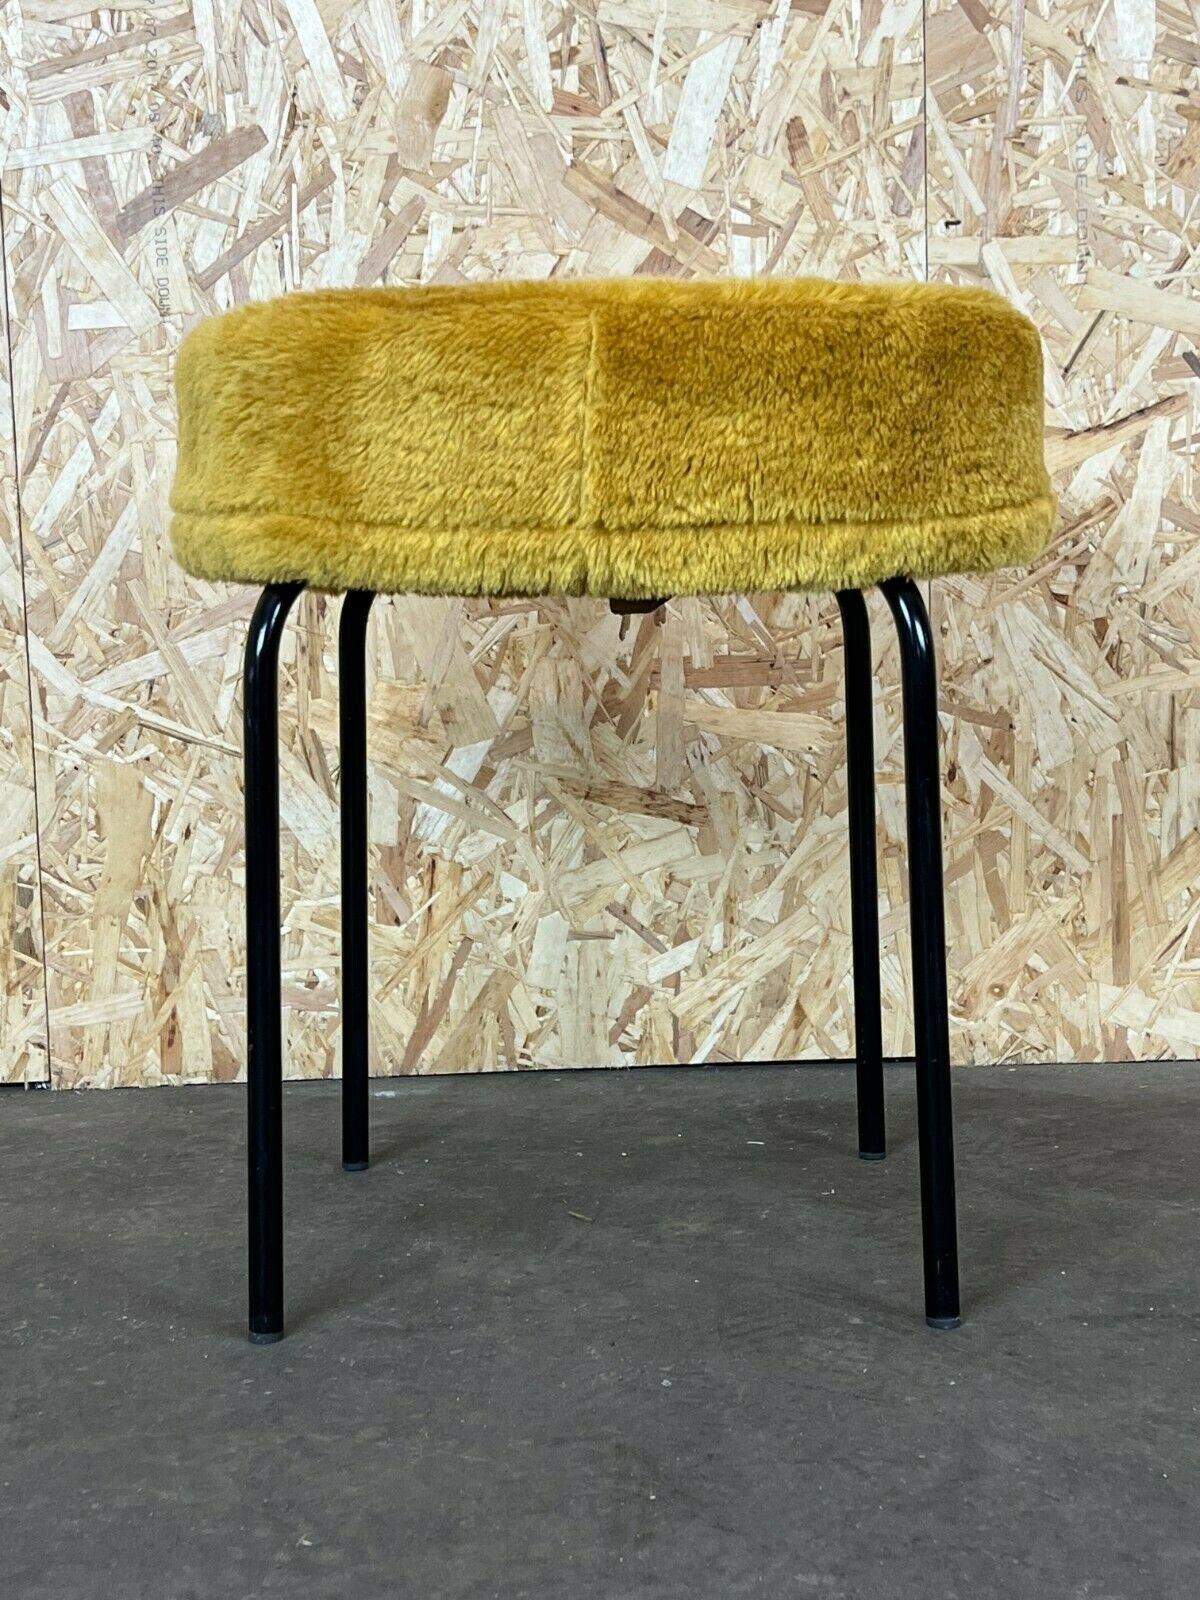 60s 70s stool ottoman stool space age mid century design 60s 70s

Object: stool

Manufacturer:

Condition: good - vintage

Age: around 1960-1970

Dimensions:

Diameter = 43cm
Height = 48cm

Other notes:

The pictures serve as part